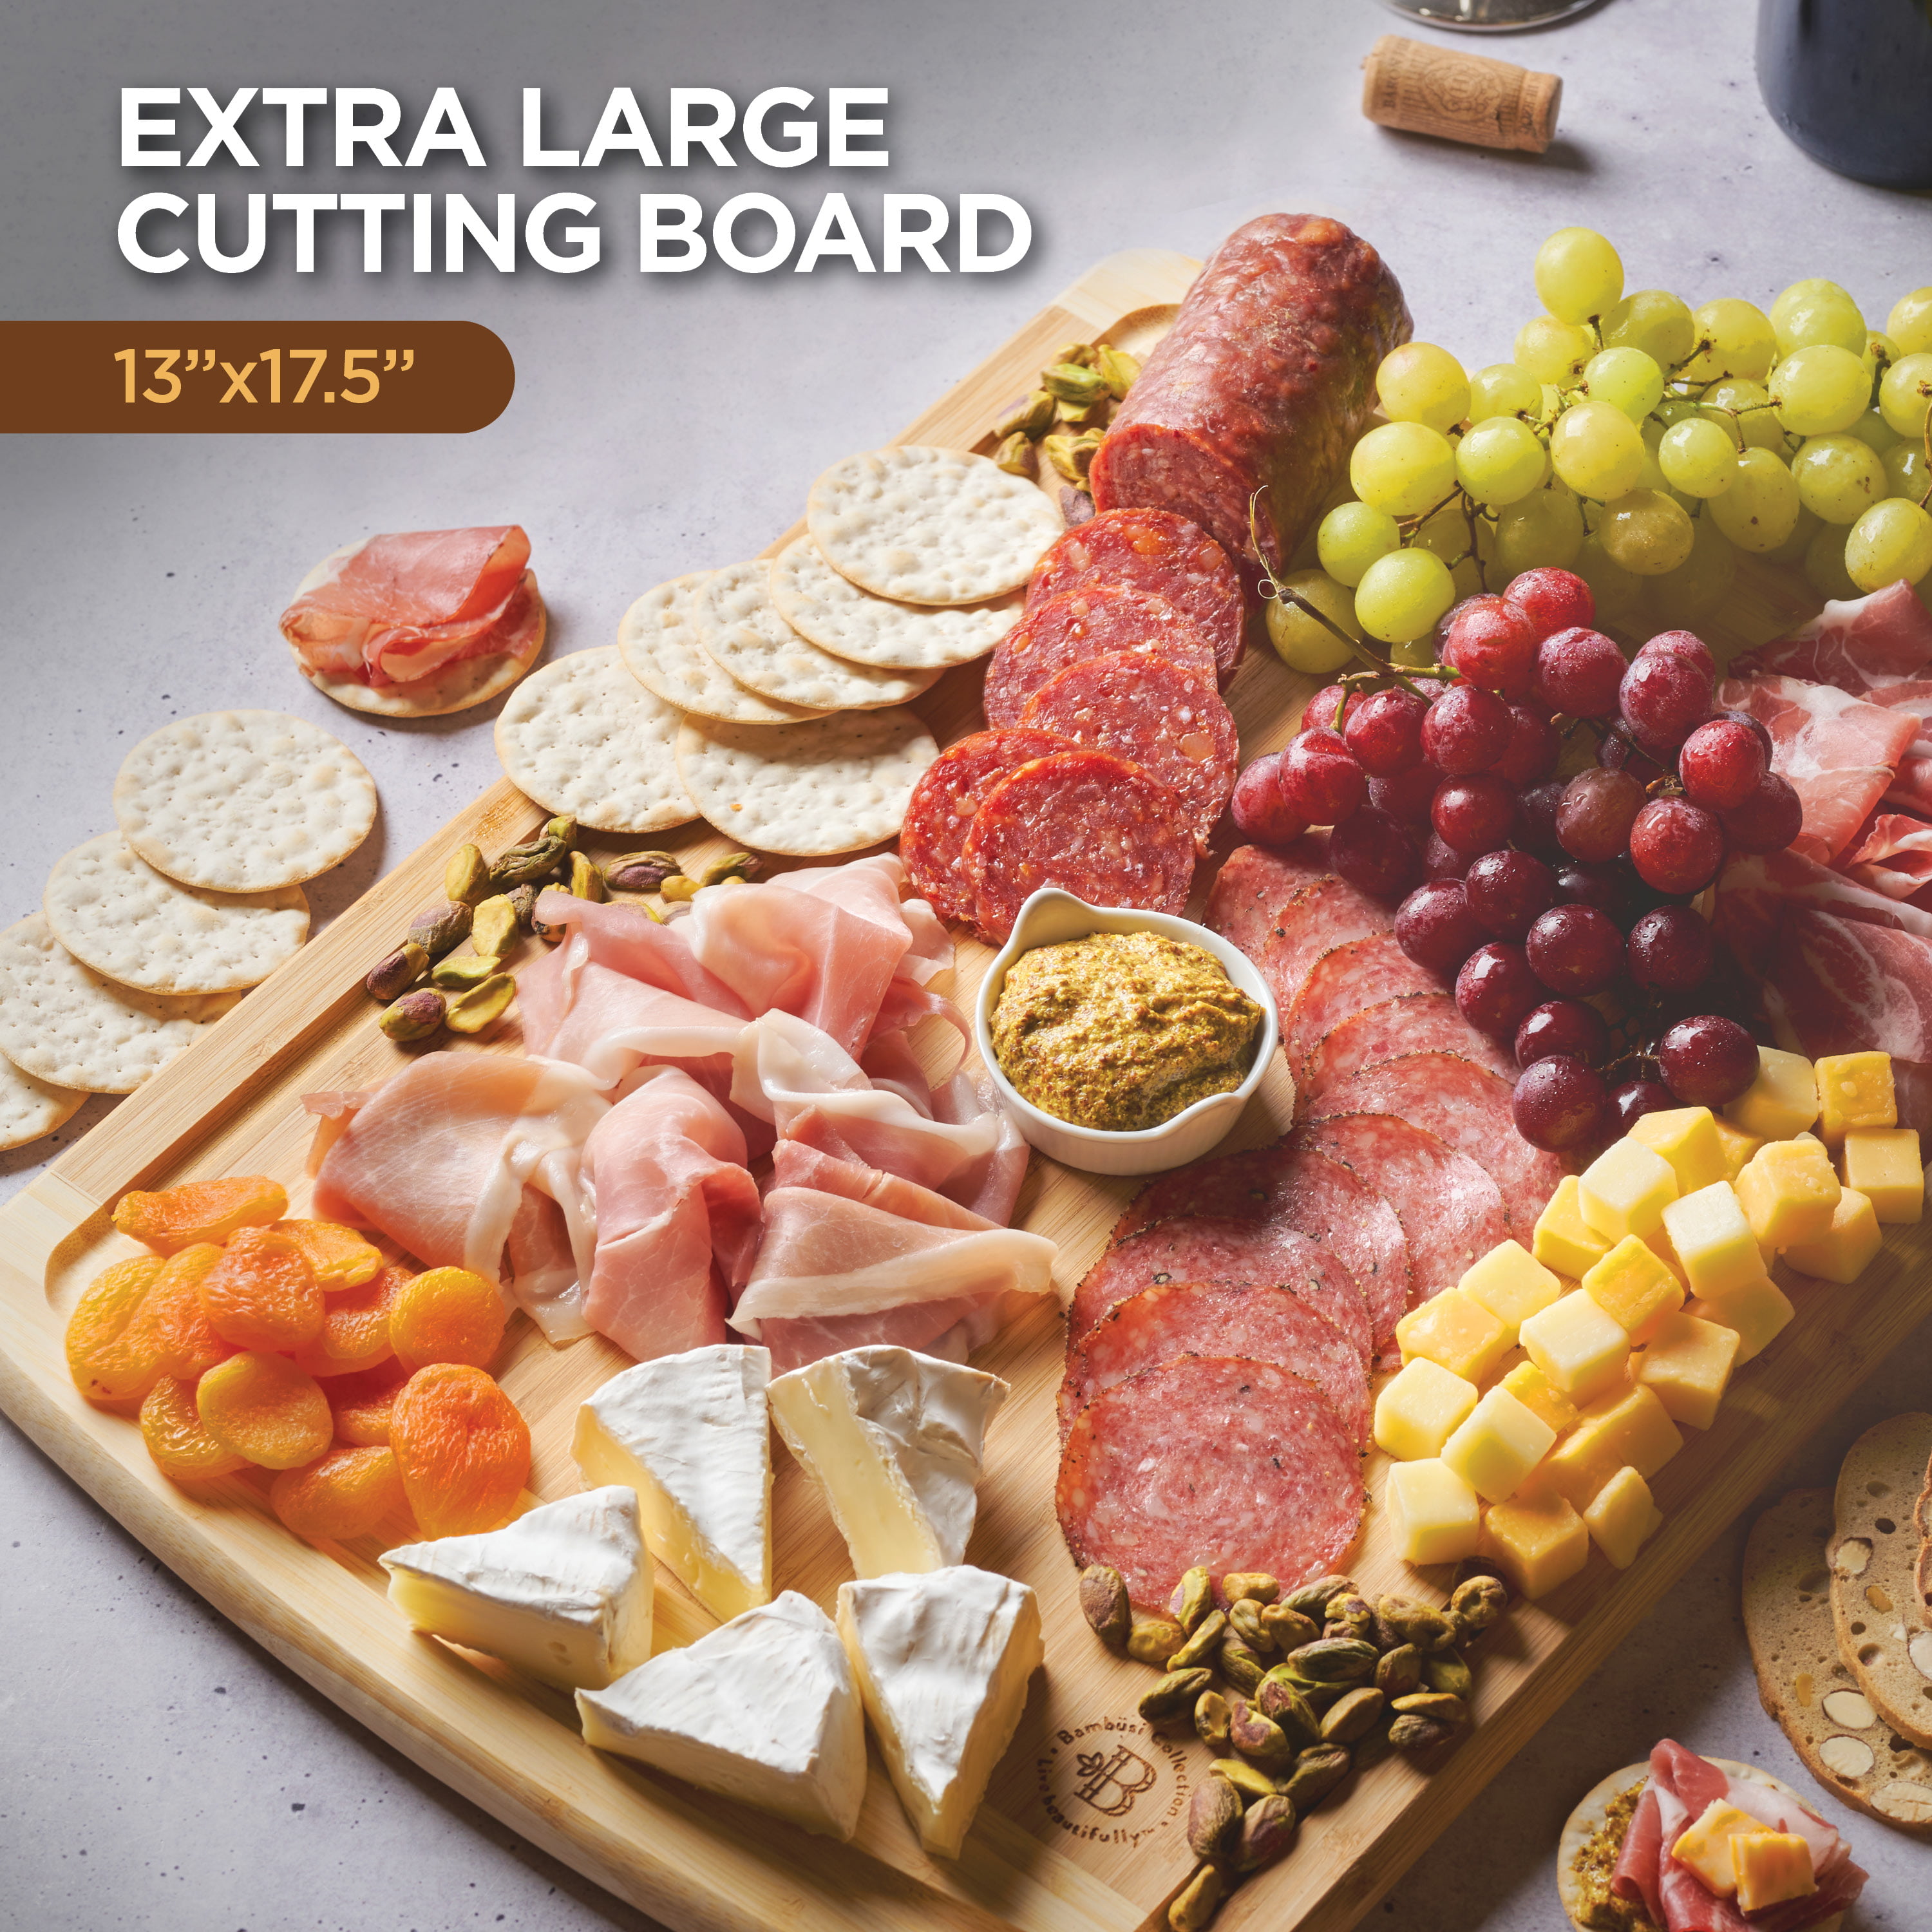  Large Bamboo Cutting Board with Silicone Grip 155871